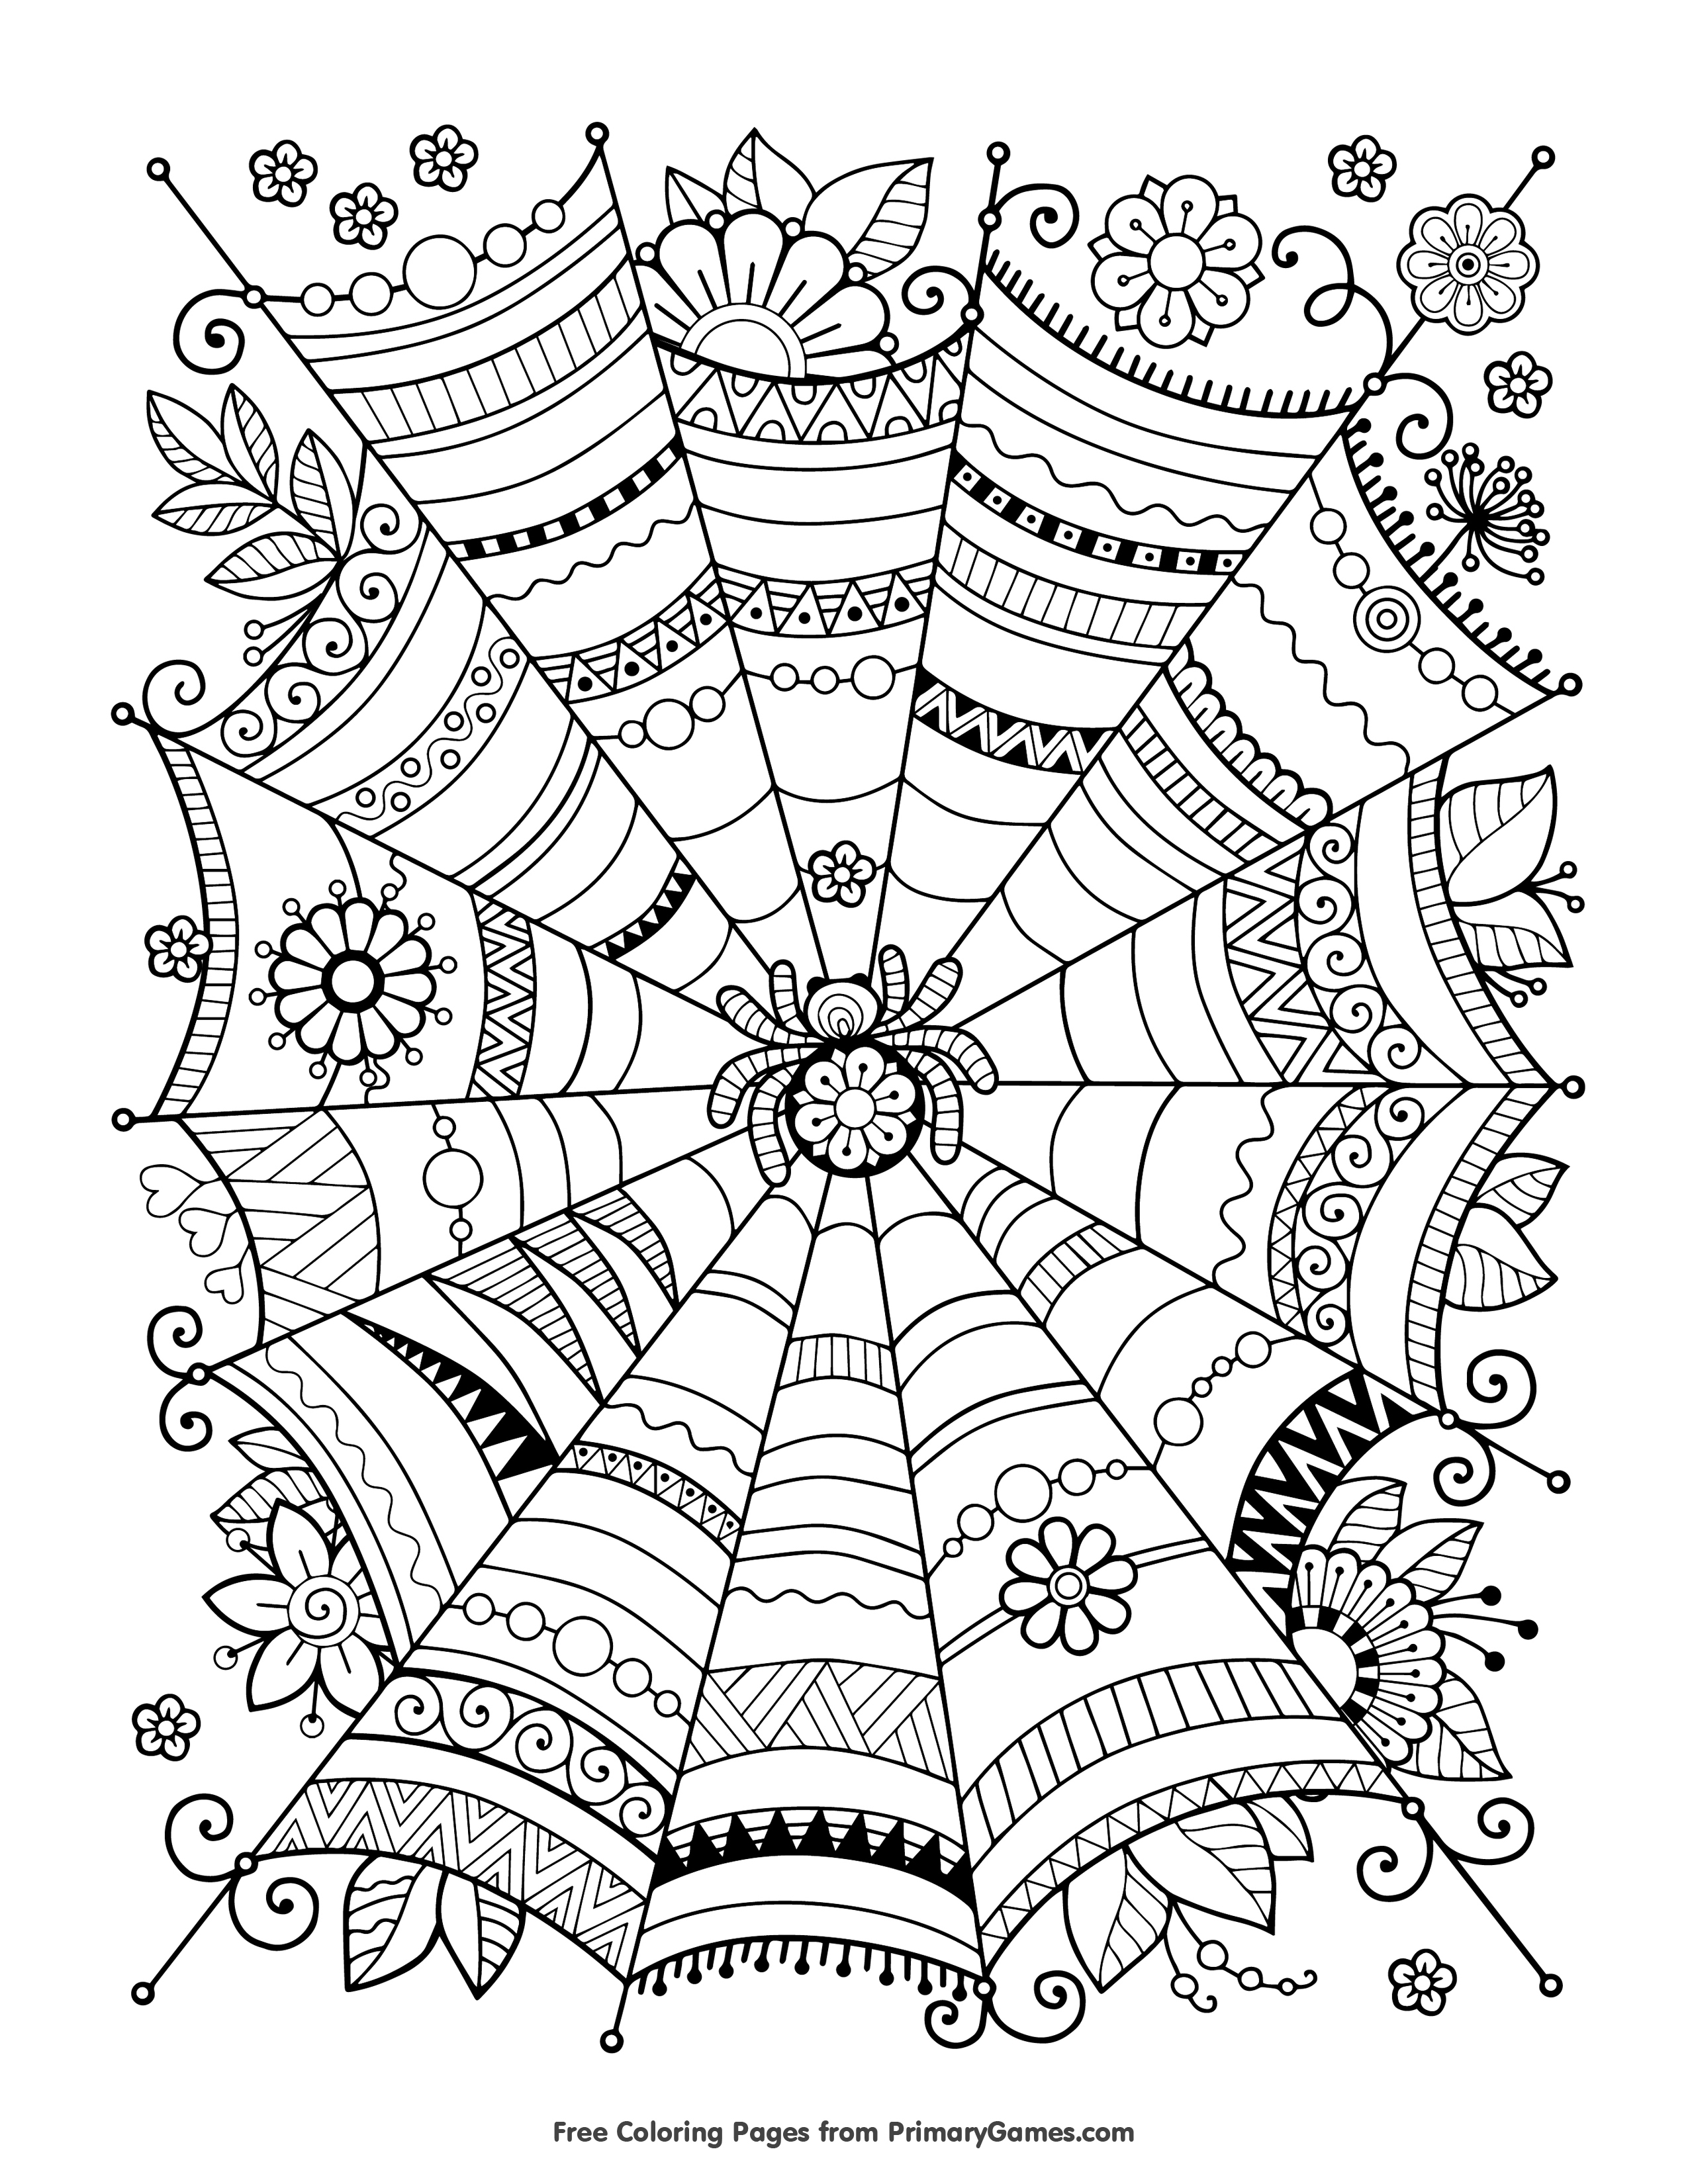 Free Halloween Coloring Pages For Adults &amp;amp; Kids - Happiness Is Homemade - Free Printable Coloring Pages For Adults